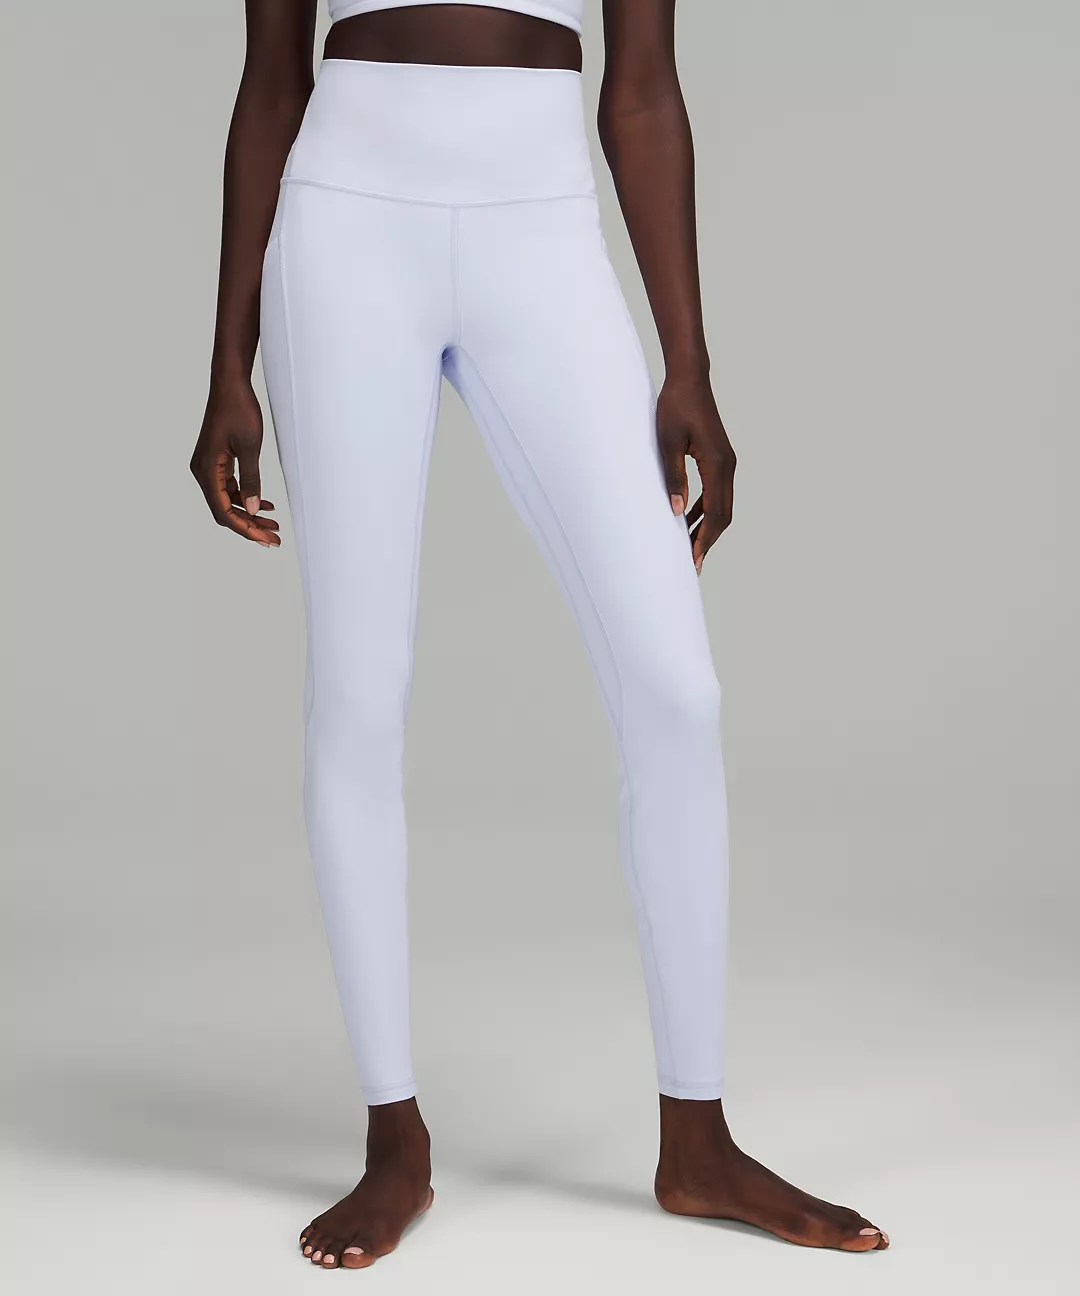 A lululemon lululemon Align™ High-Rise Pant with Pockets 28"
Online Only